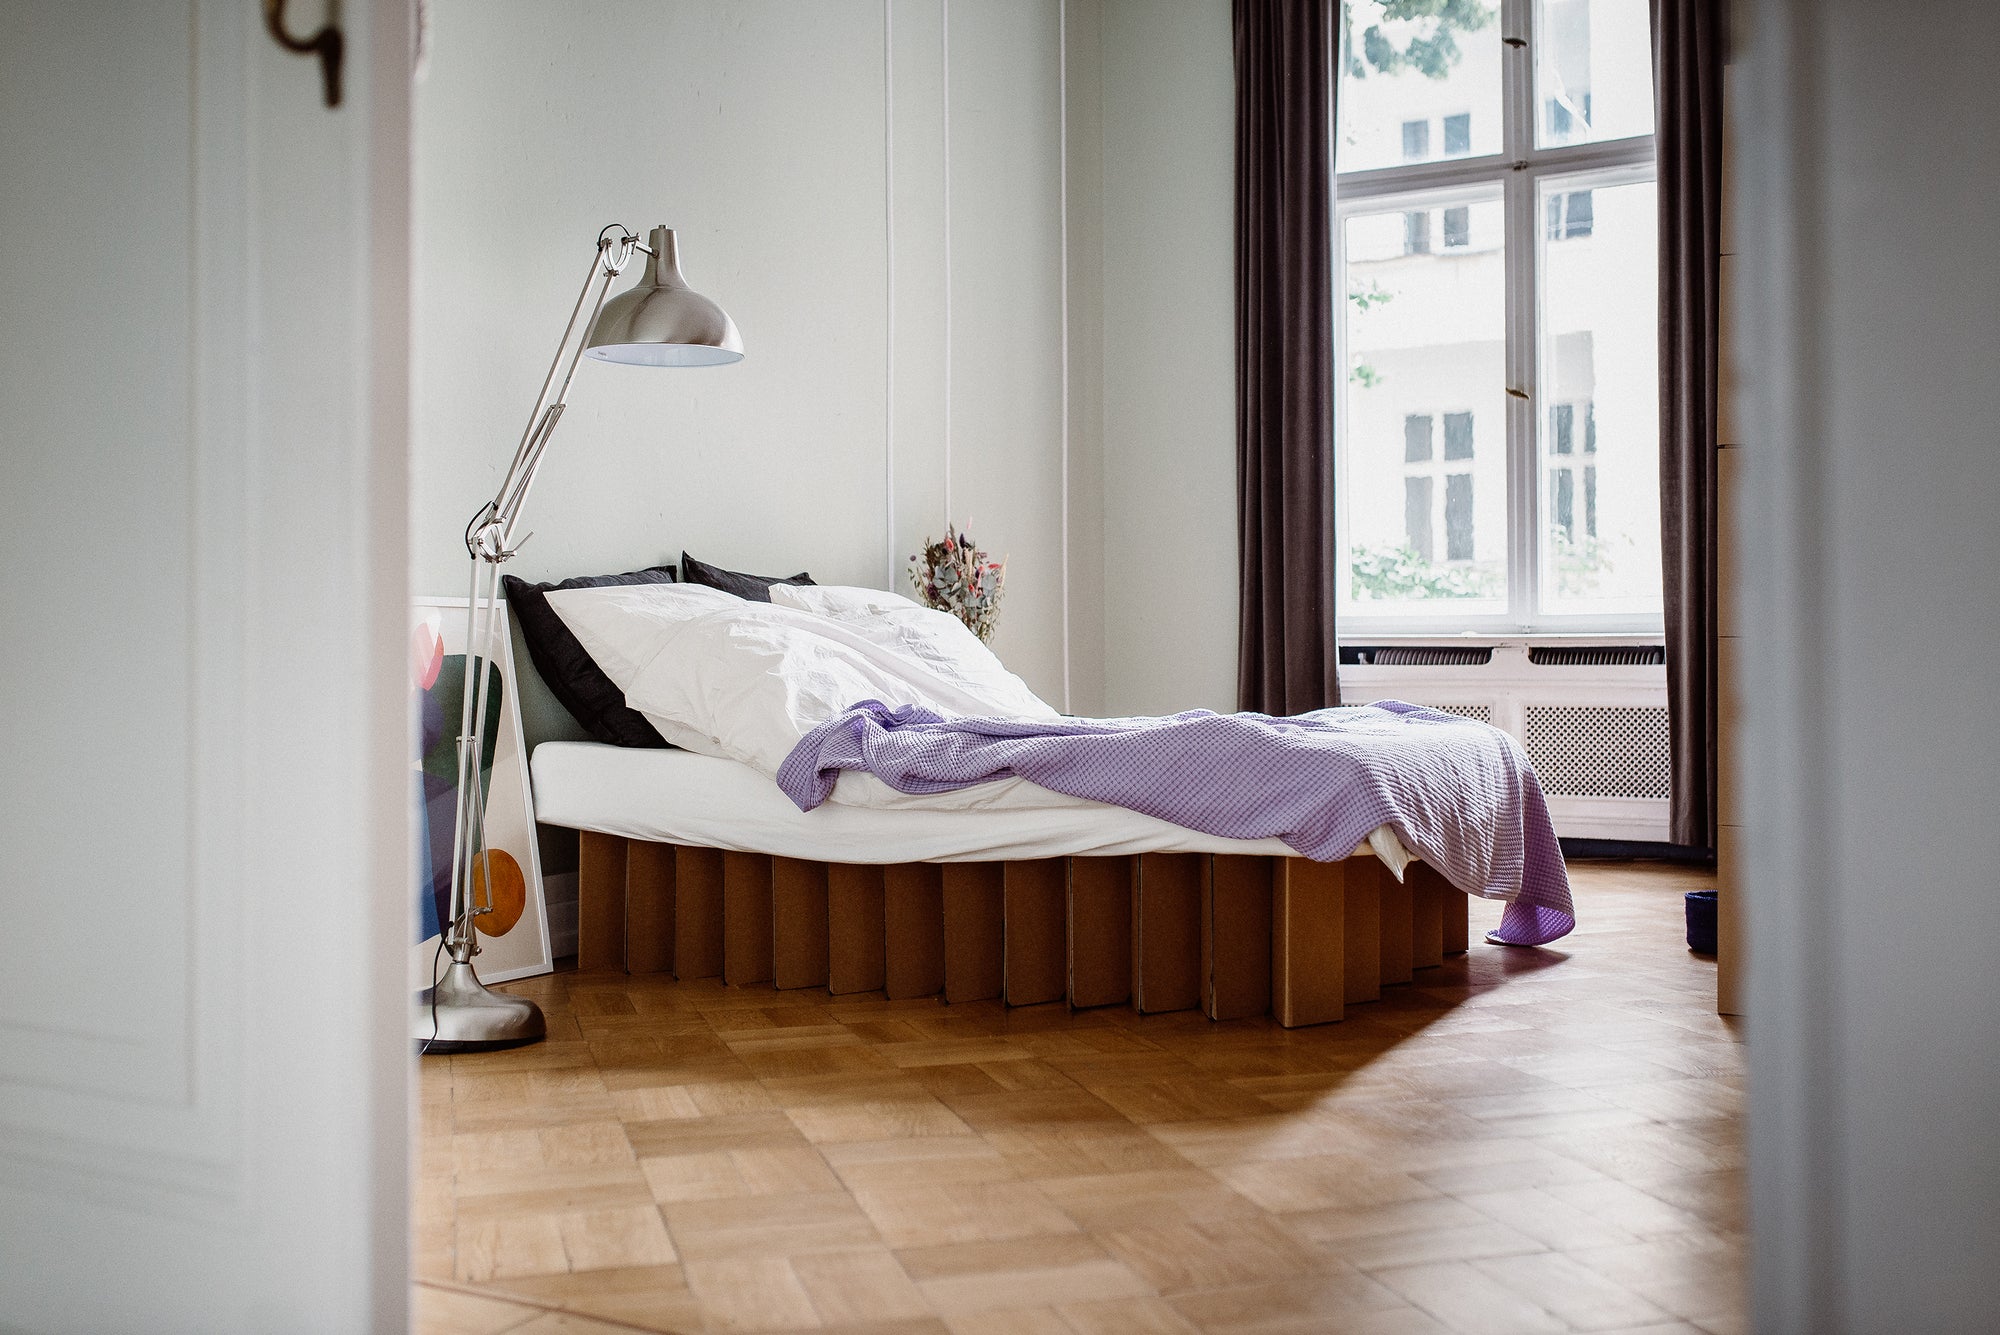 full size Bett 2.0, an eco-friendly bed frame by RIAB USA, on parquet floor with purple comforter and modern silver lamp